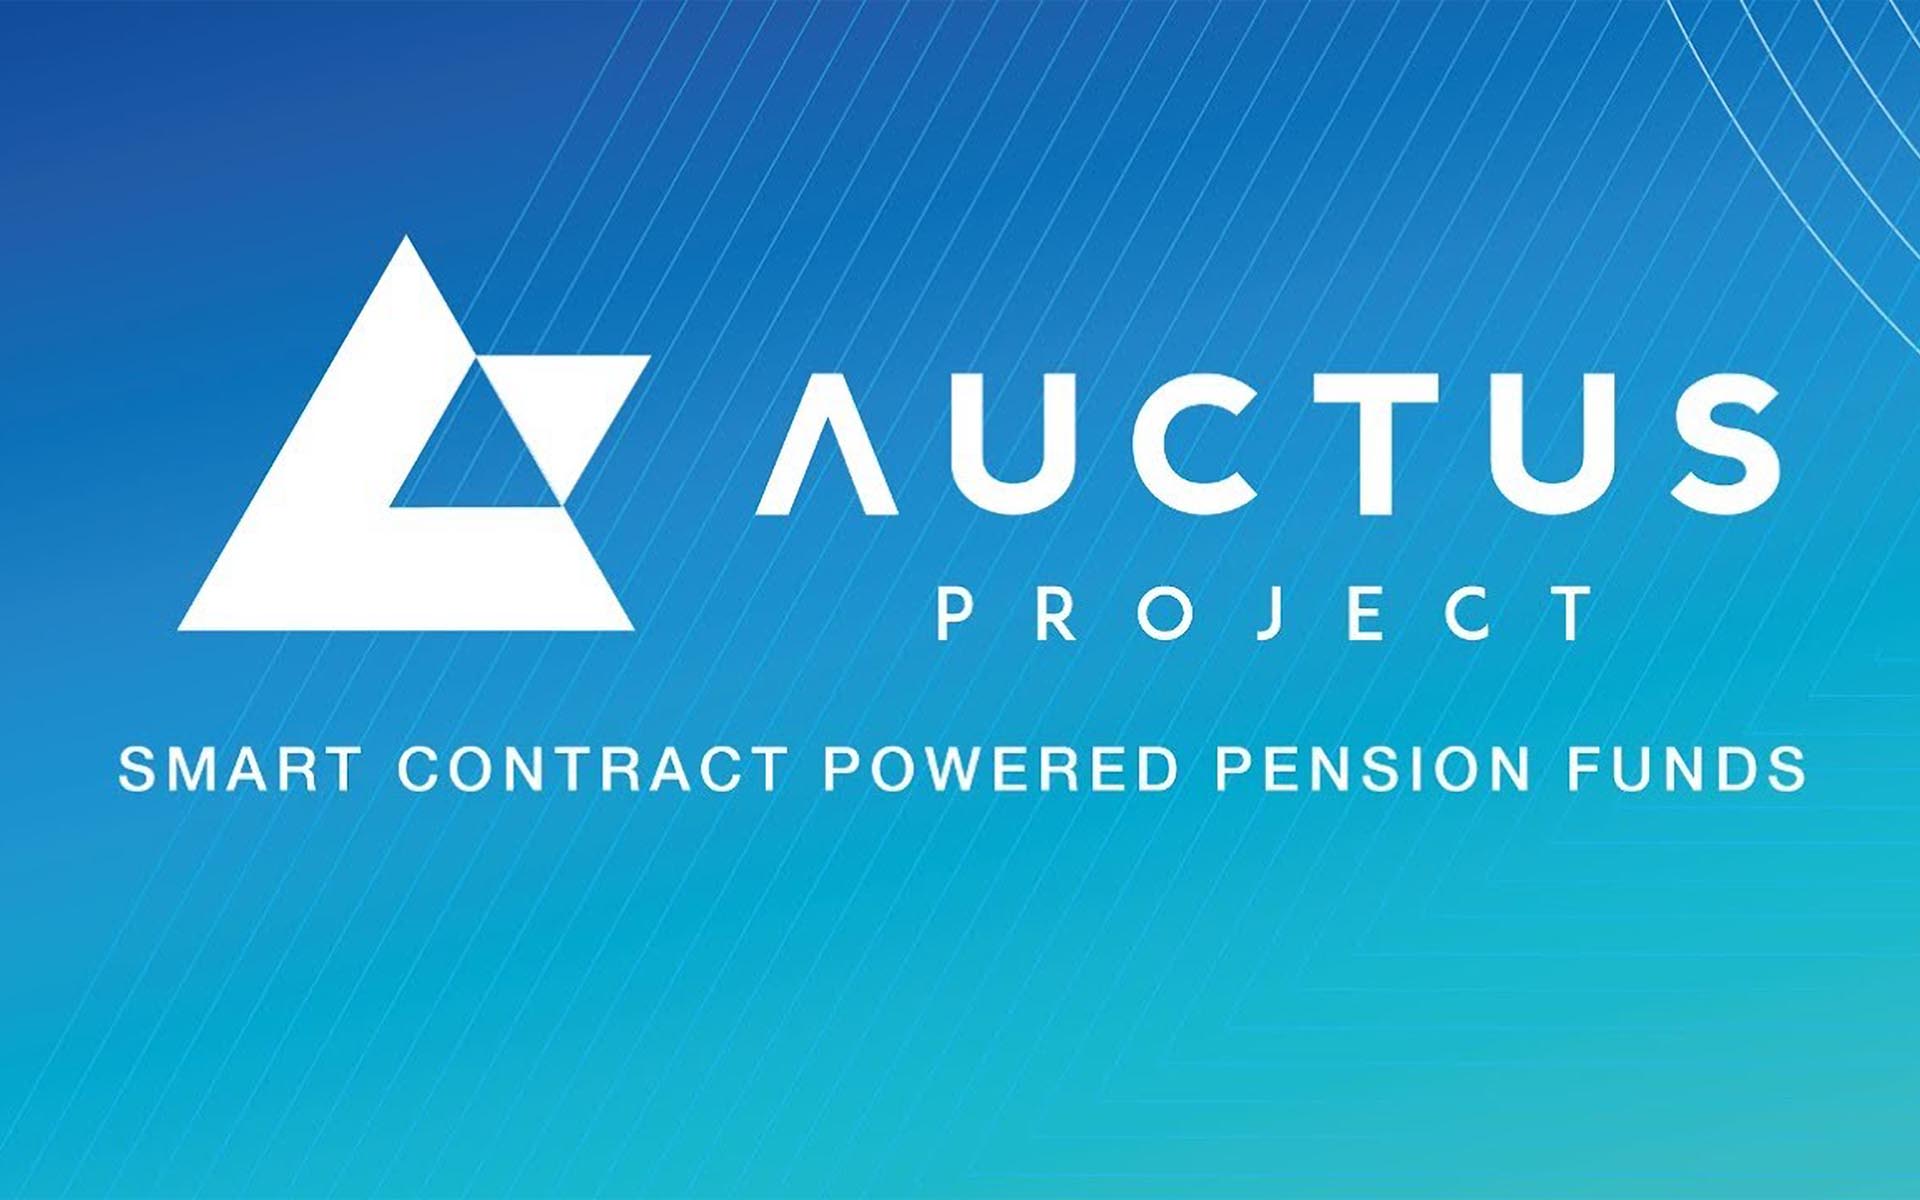 Auctus Integrating Bancor ProtocolTM to Provide Continuous Liquidity for AUC Token Holders